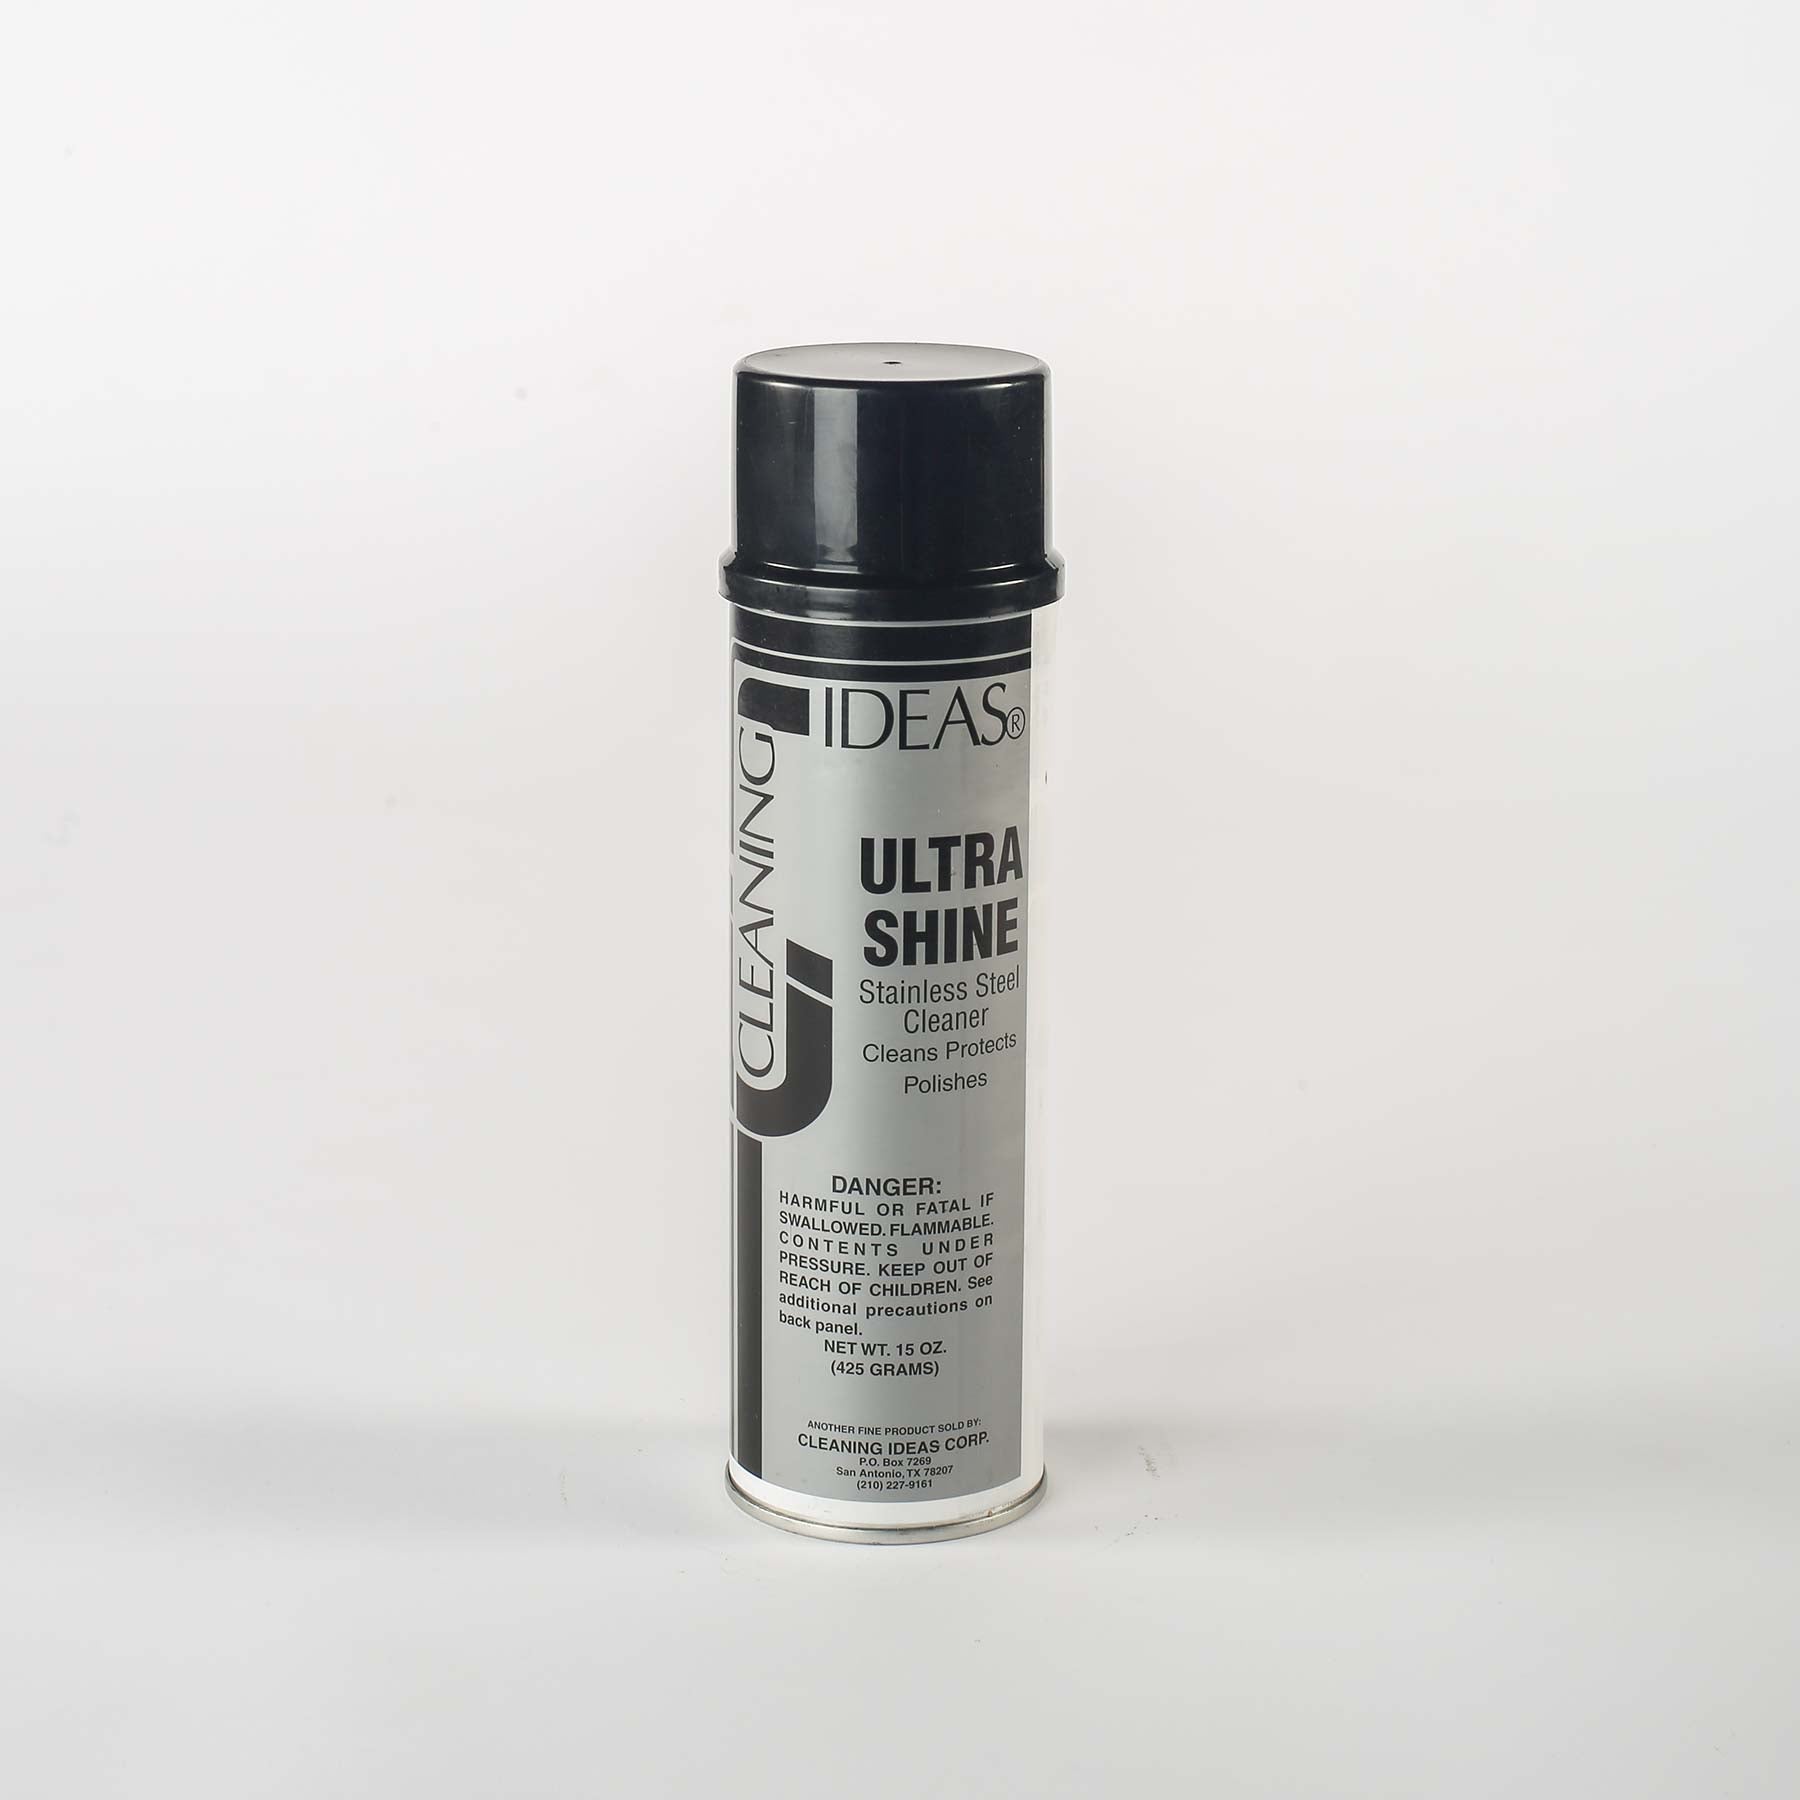 Ultra Shine Stainless Steel Cleaner